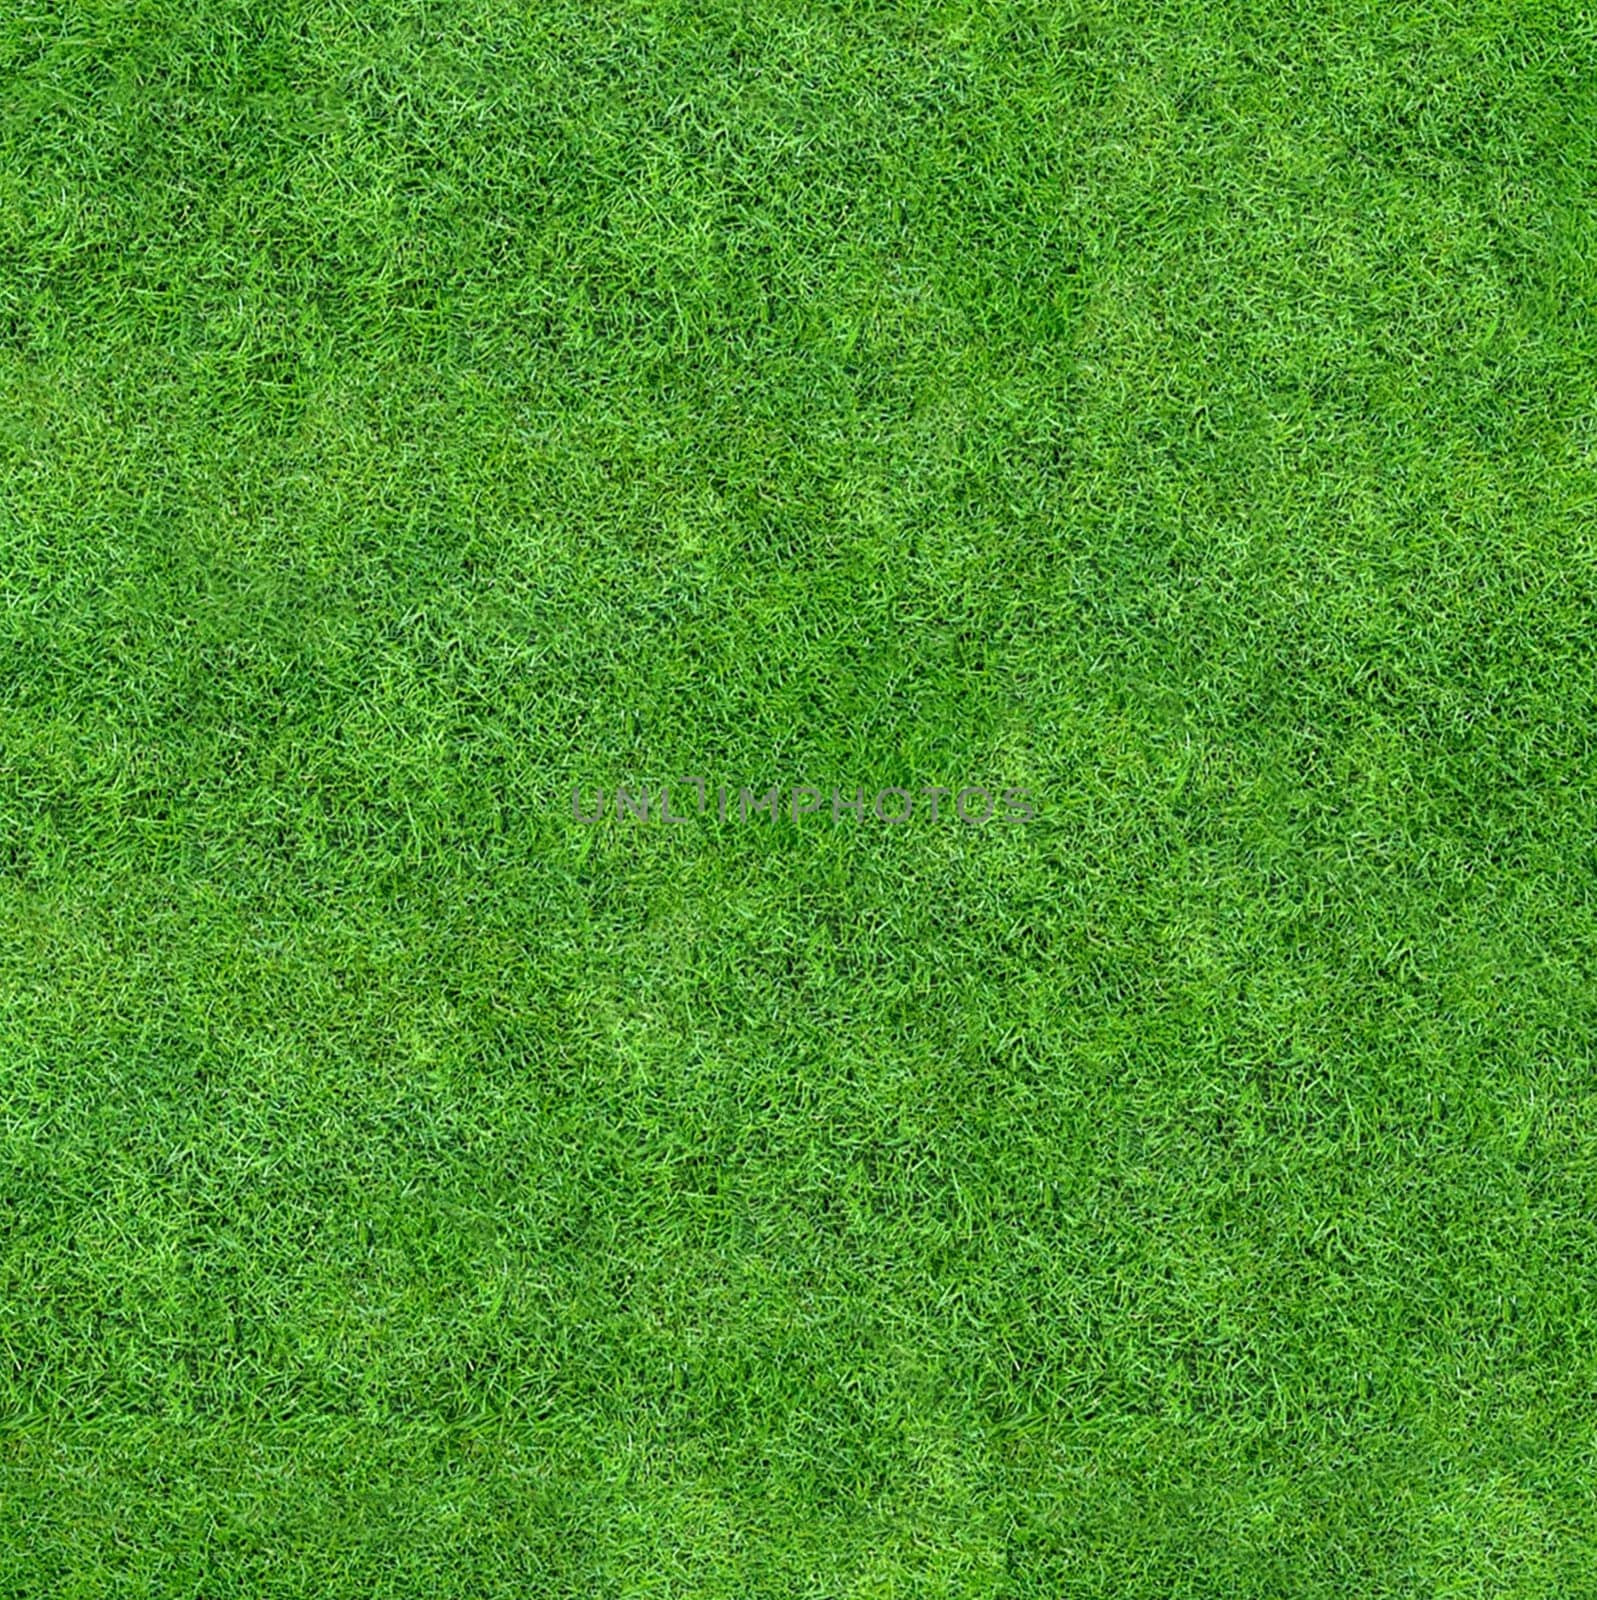 Background texture of green grass top view